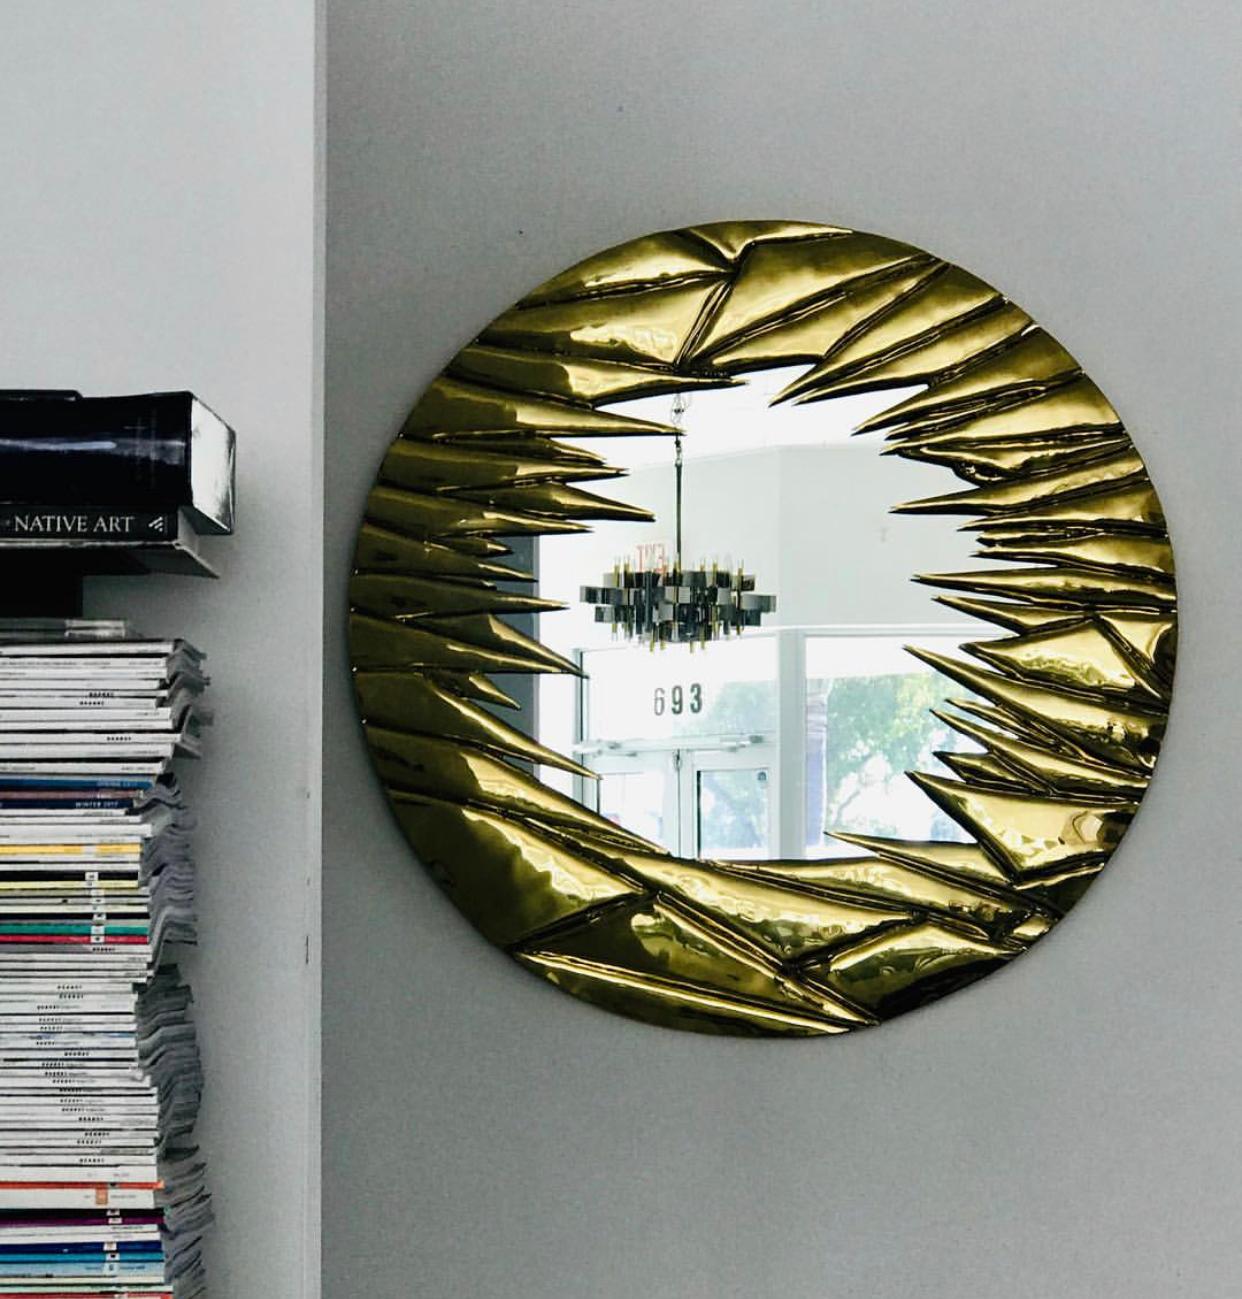 A custom studio made mirror by French designer and sculptor Alain Chervet, circa 1981. Unique piece in solid brass with sculptural corrugated folding form, partially Brutalist, partially Hollywood Regency, glamorous and bespoken. Signed and dated.